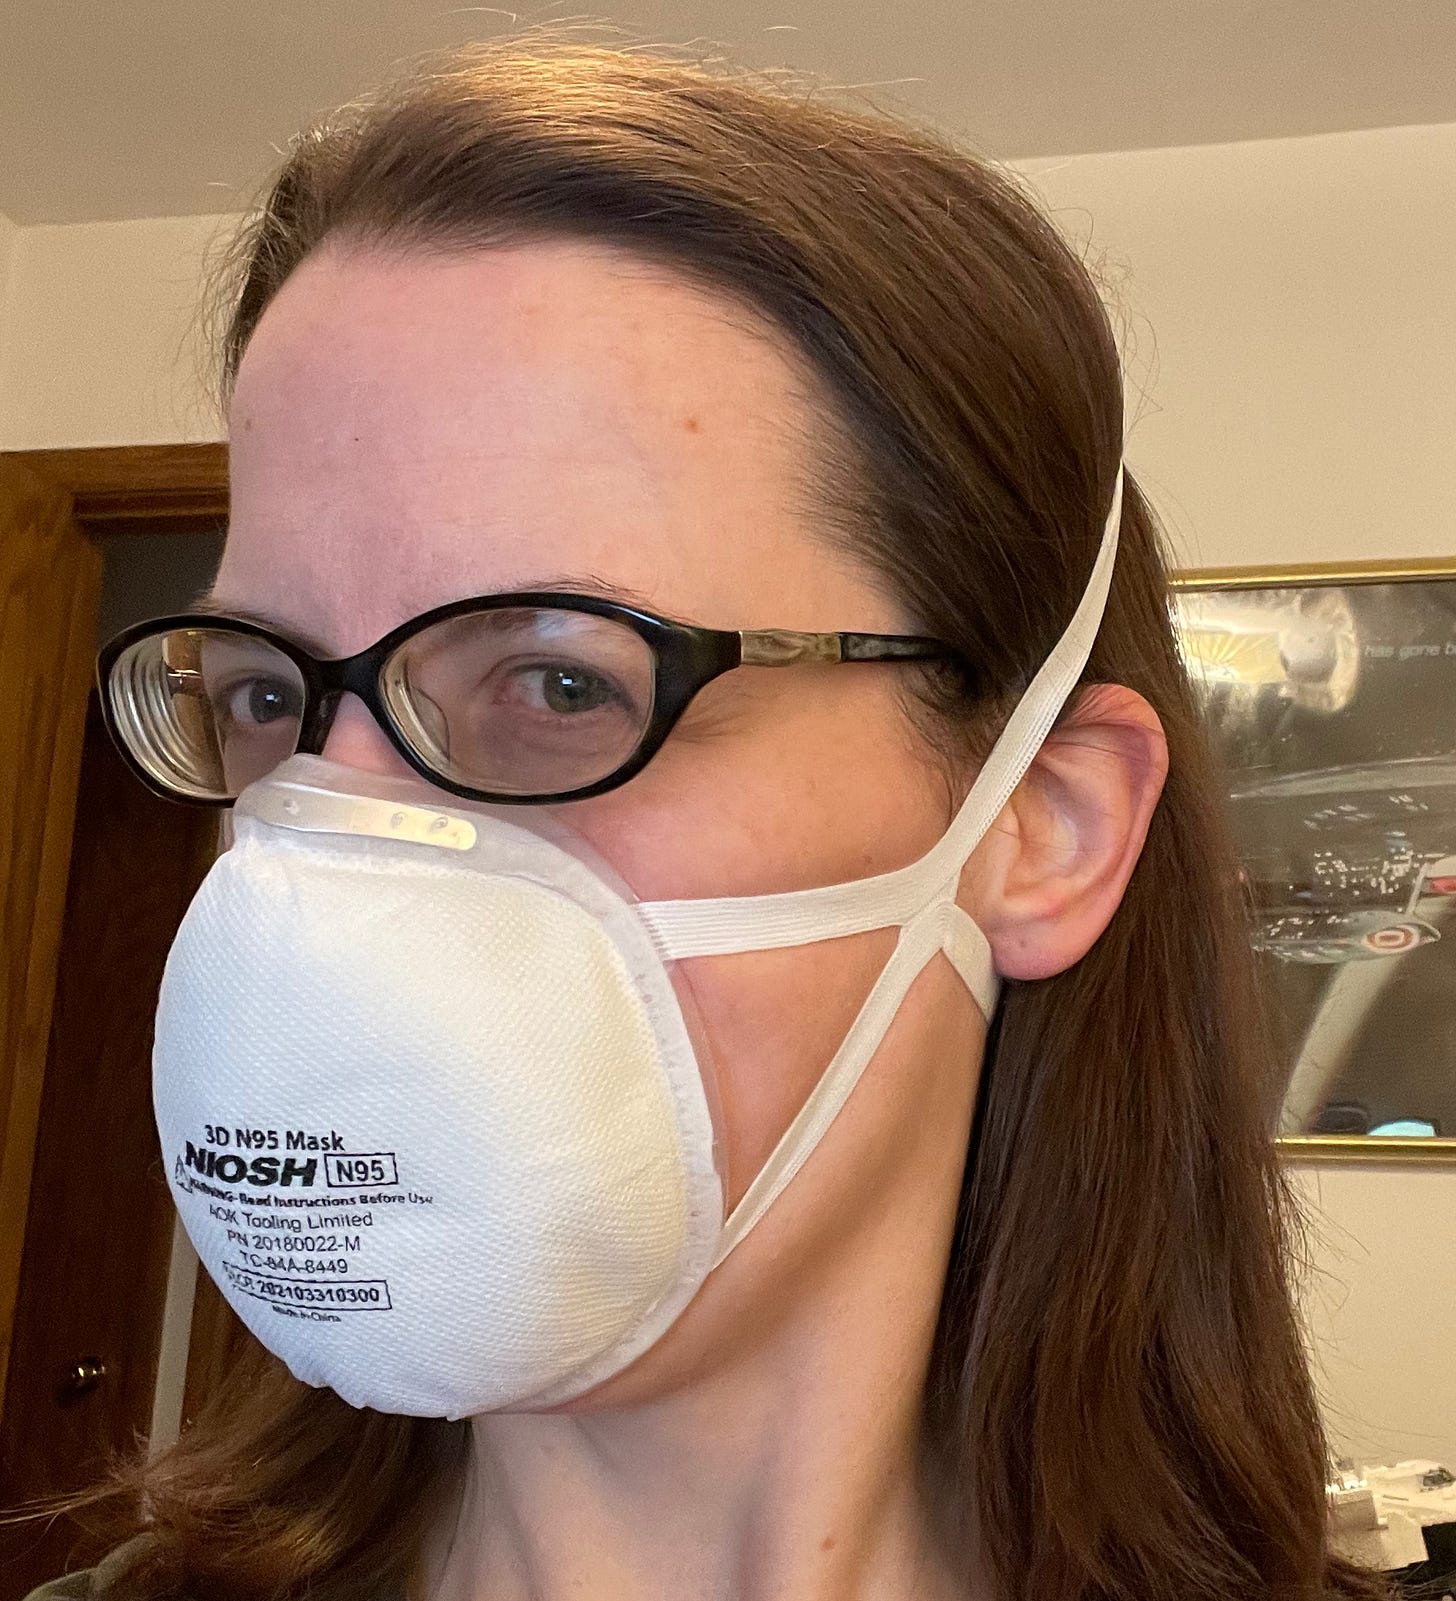 Woman wearing glasses and a cup-shaped N95 respirator